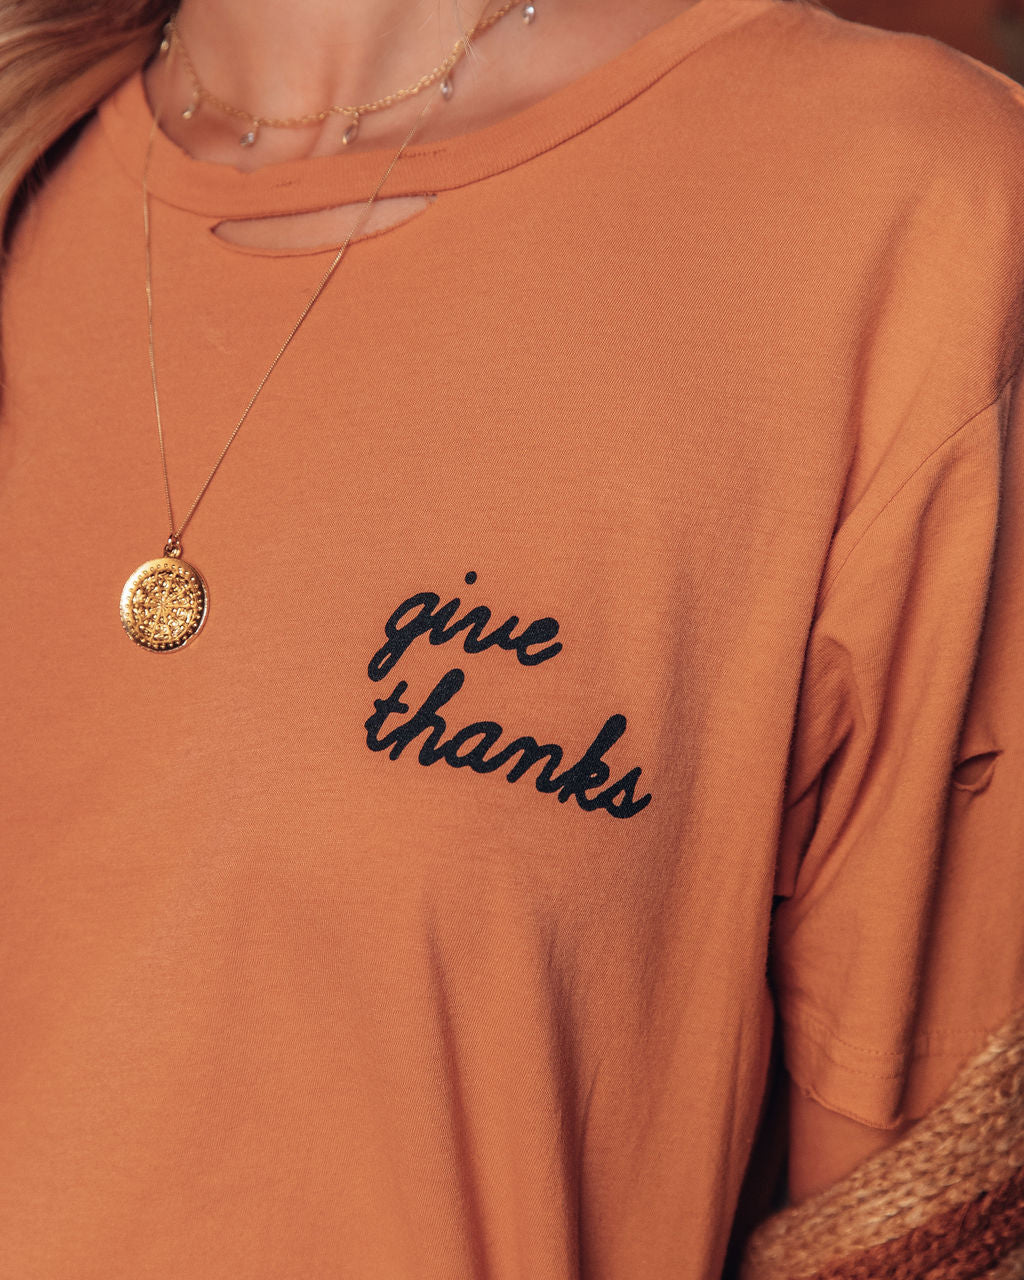 To Give Thanks Distressed Cotton Tee